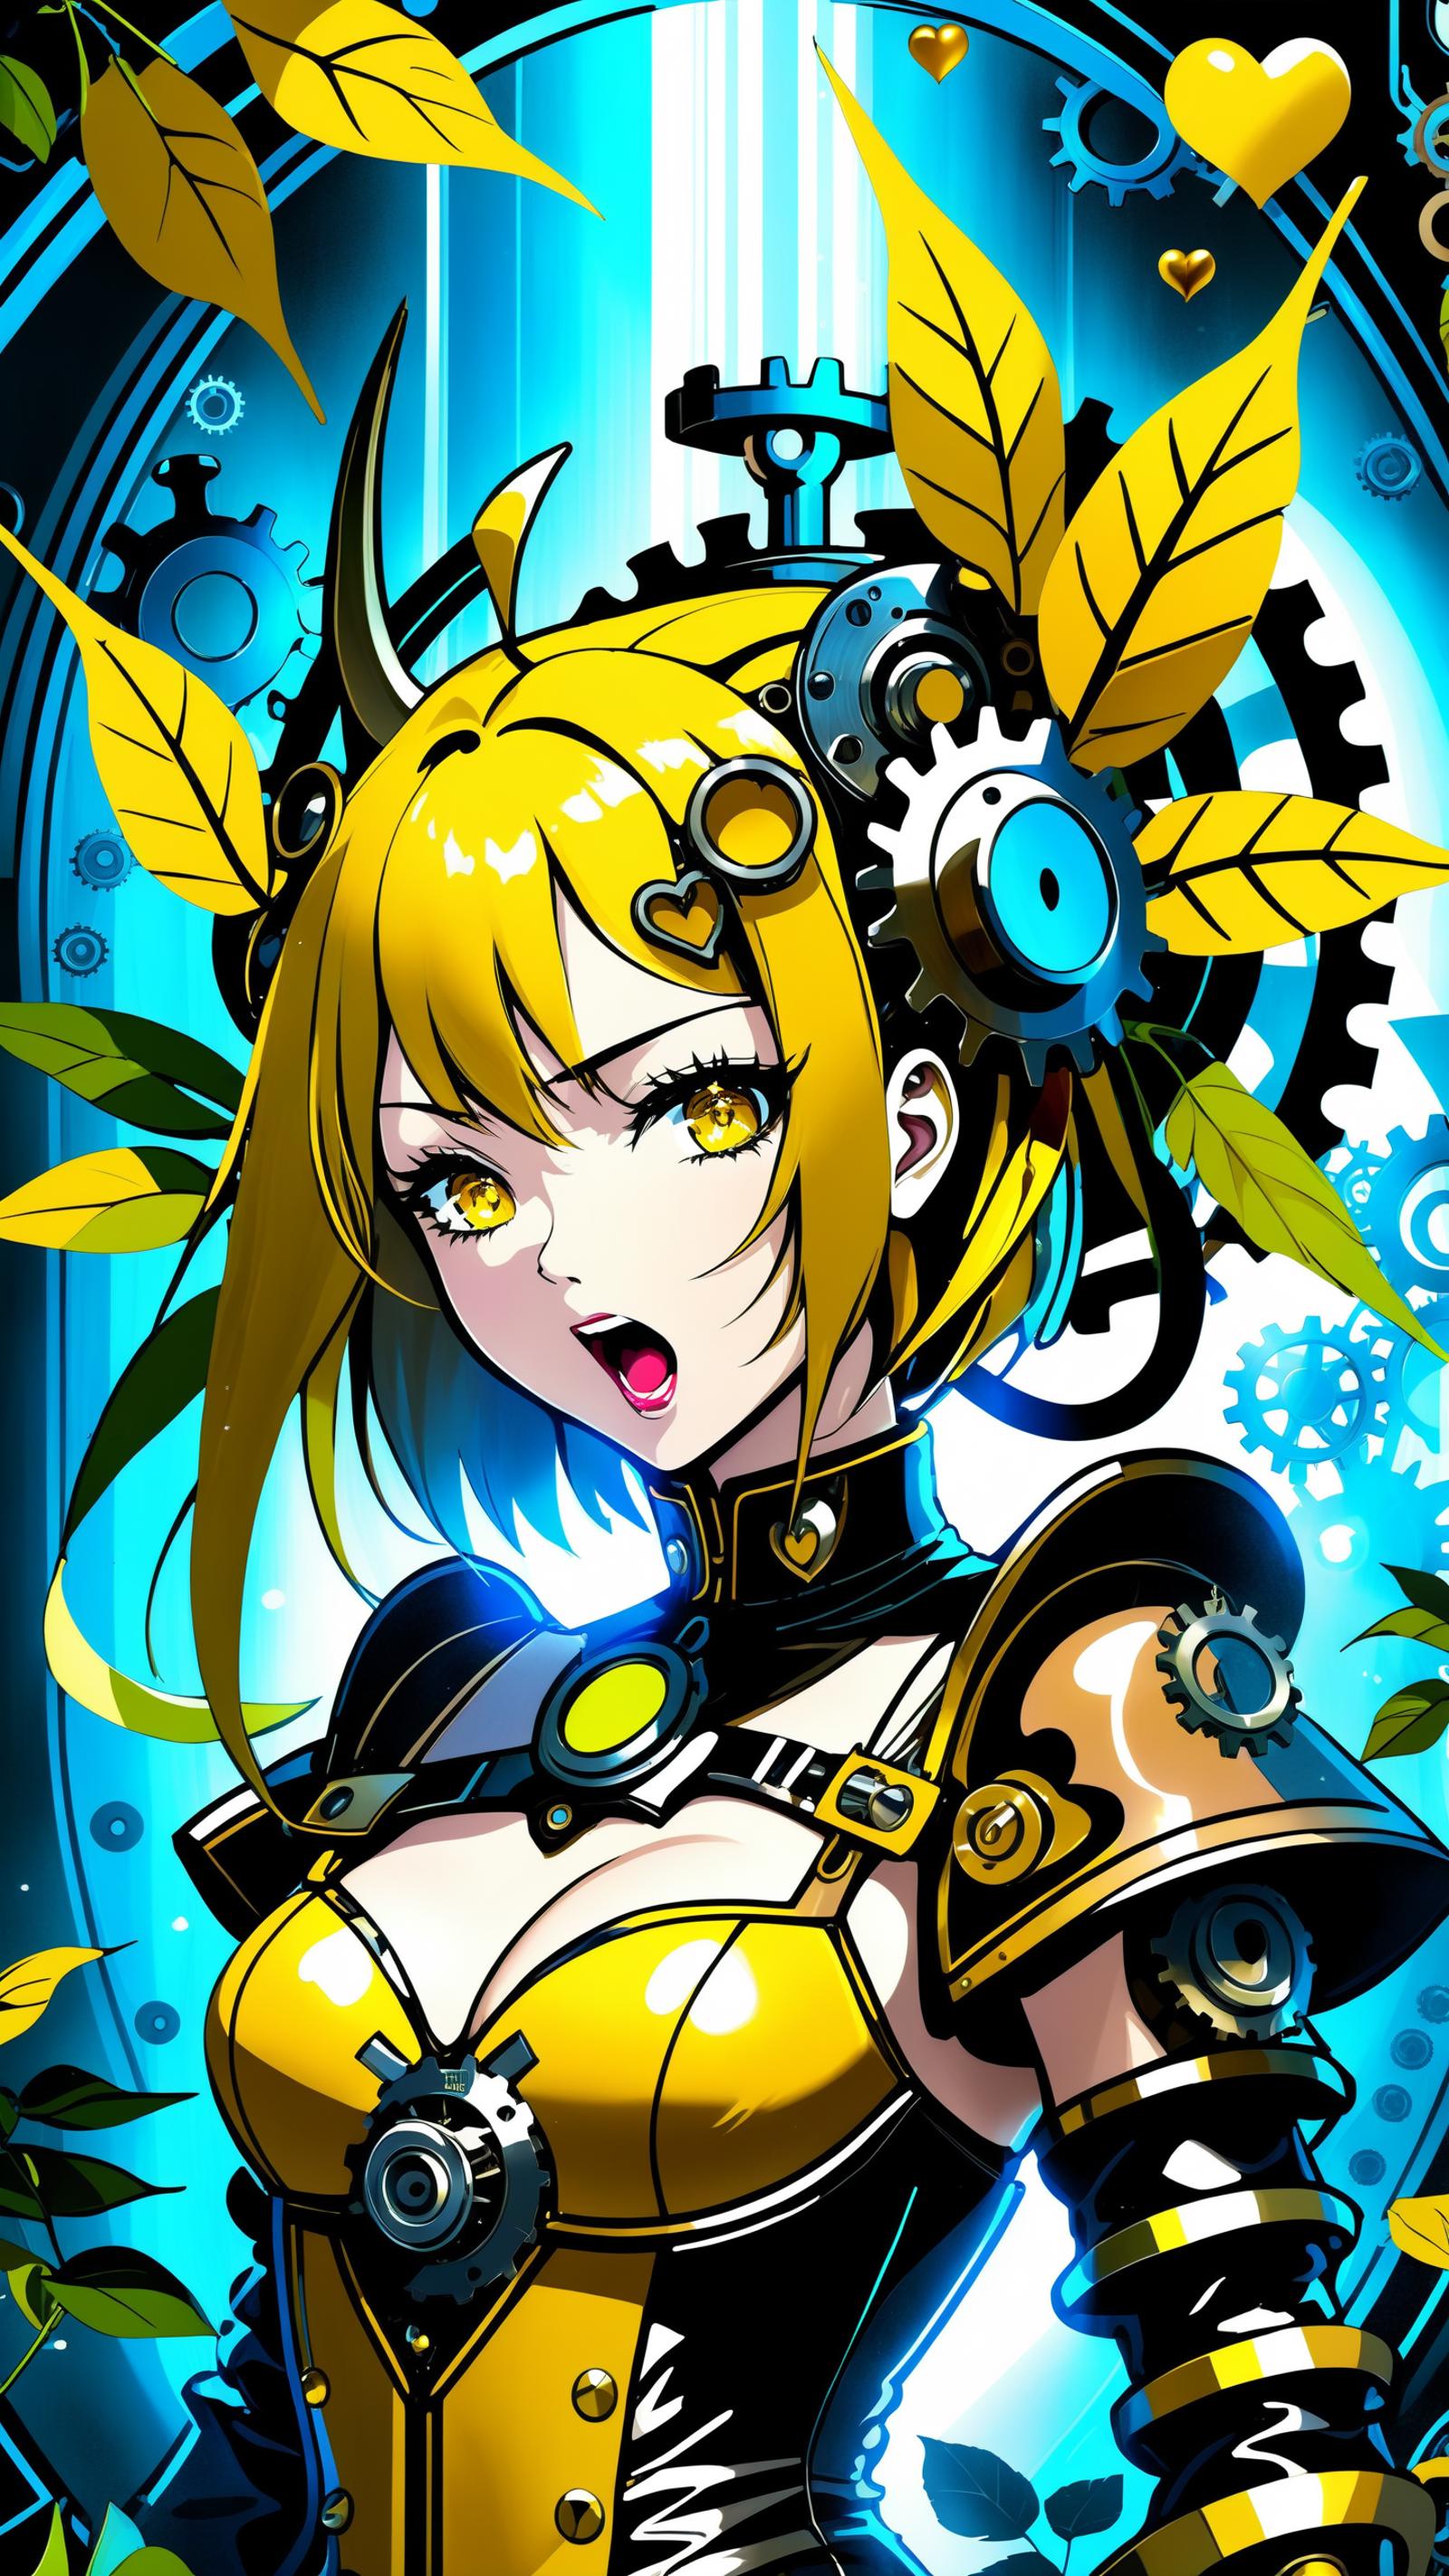 Anime-inspired female character with a yellow dress and a gadget-like necklace.